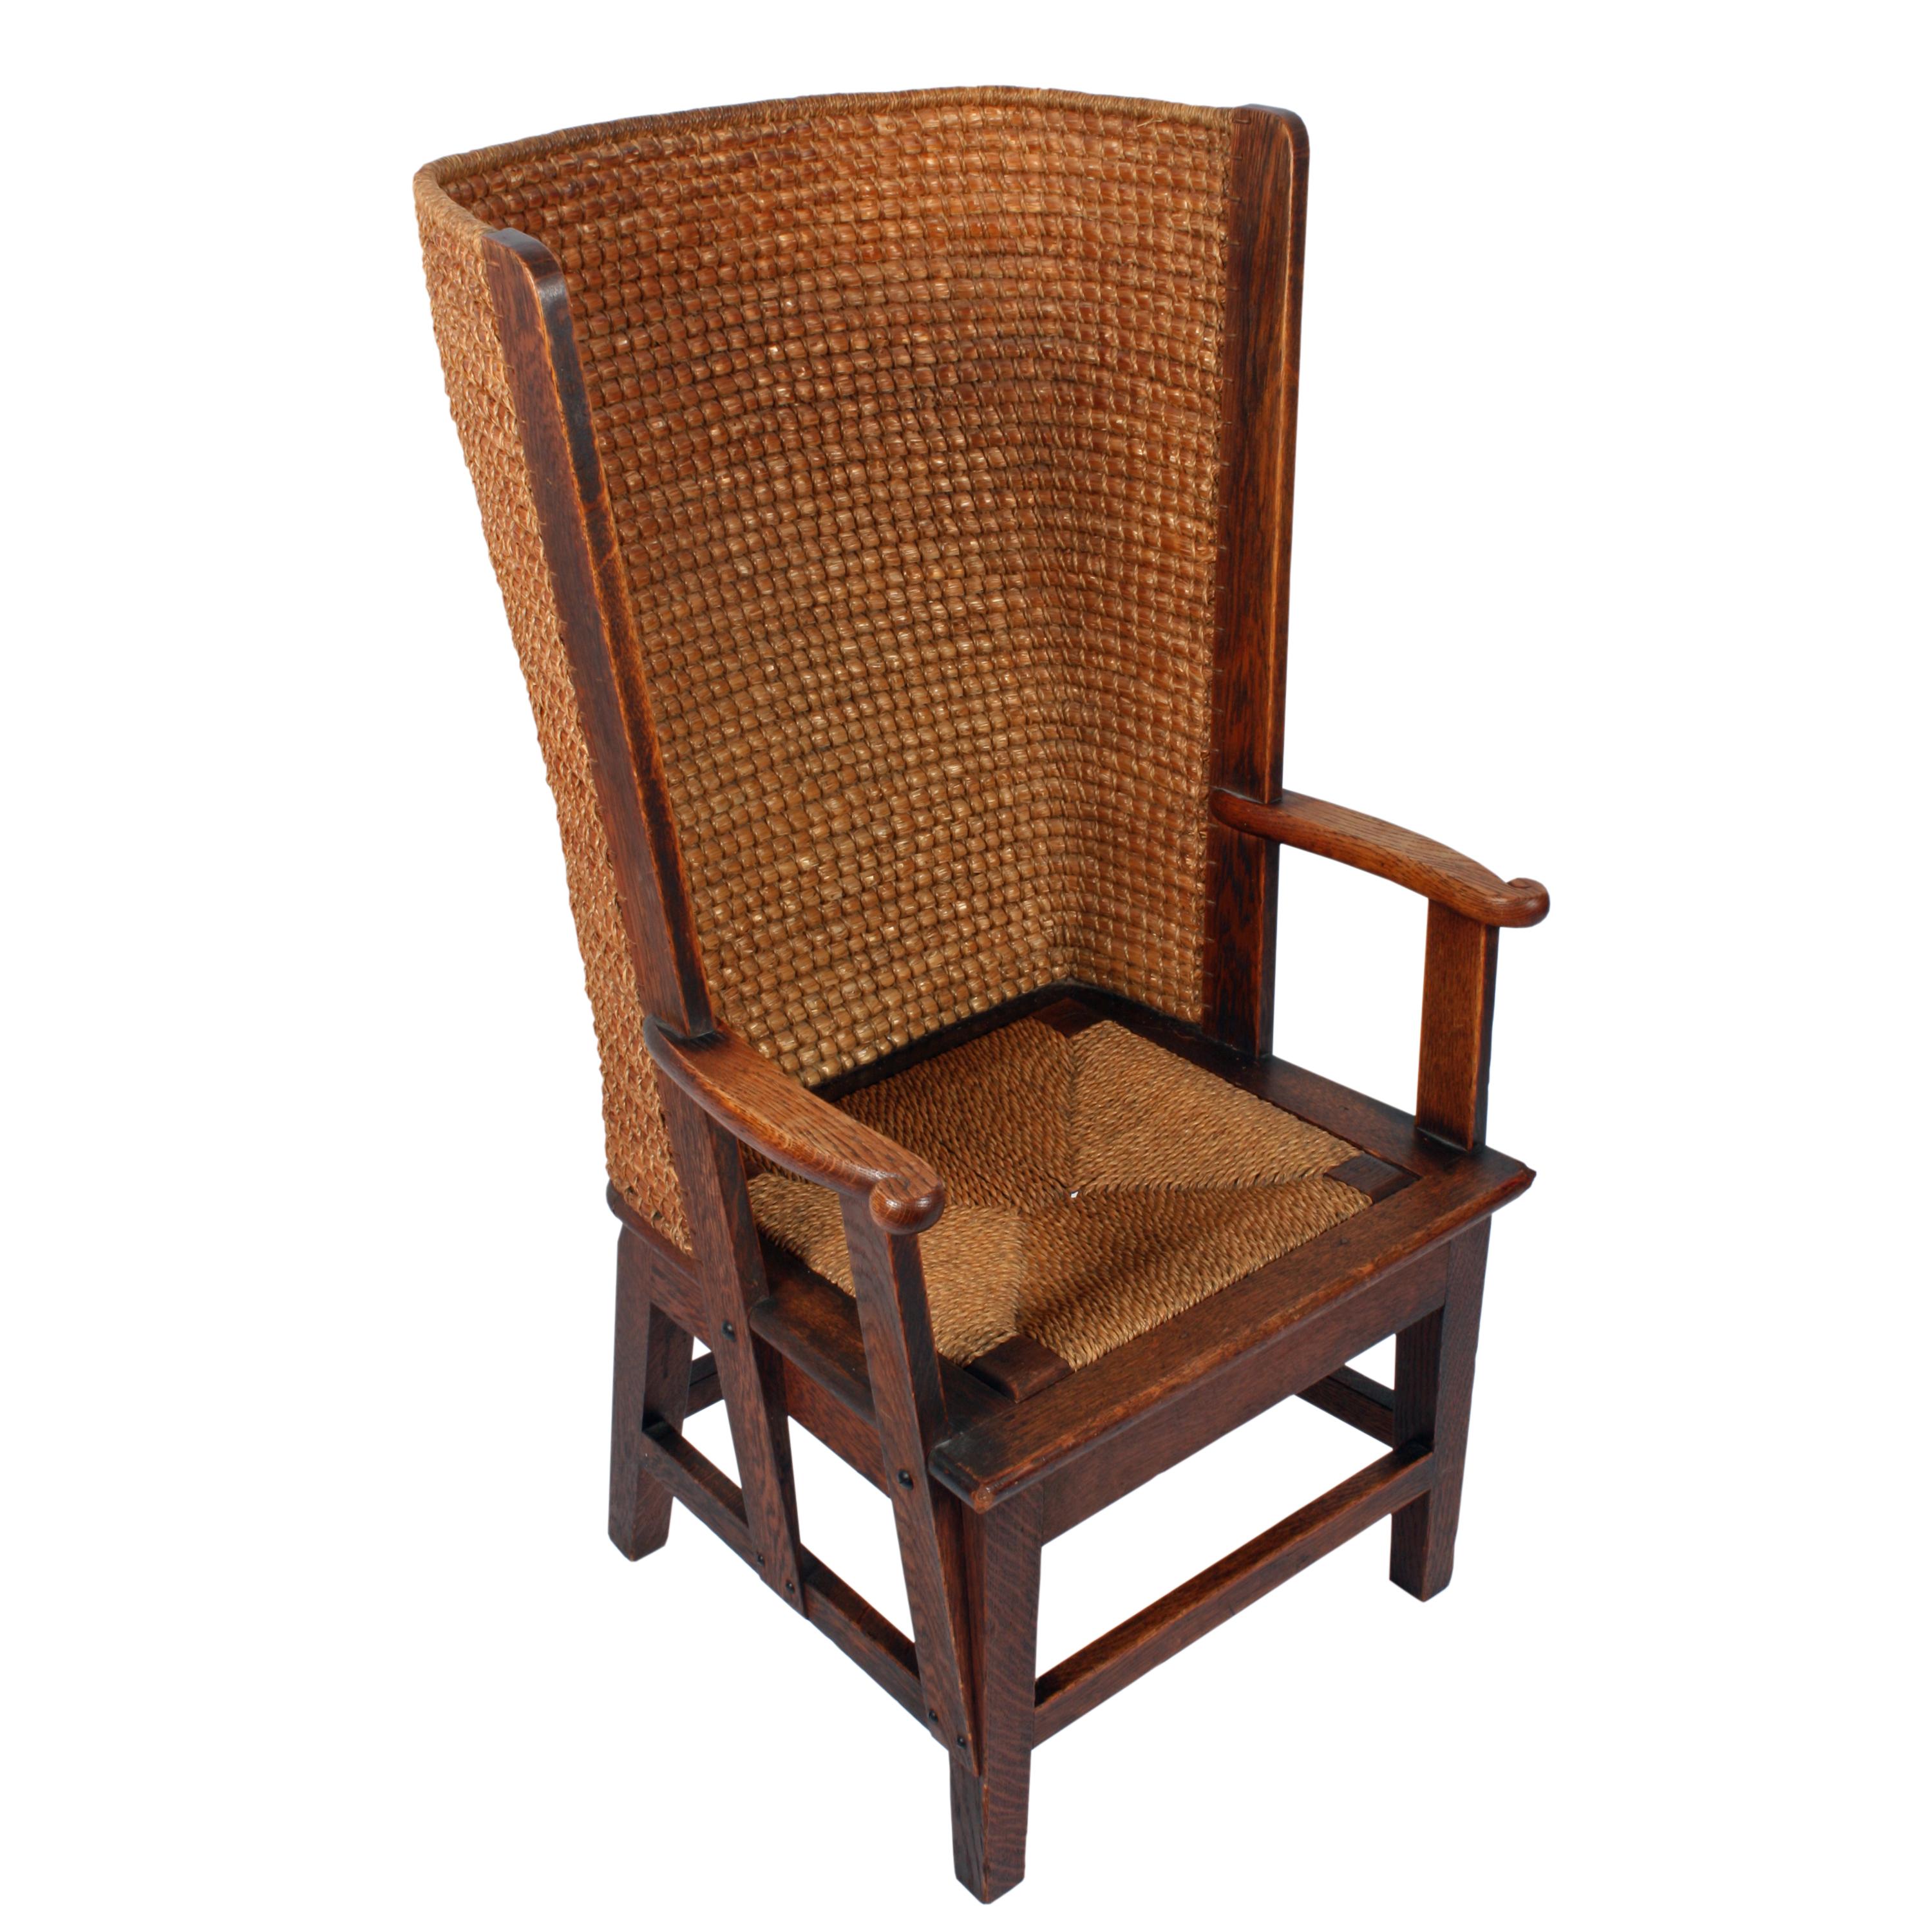 A late 19th-early 20th century large oak Scottish Orkney chair.

The back is constructed from black oat straw and bent grass, bound together with cord made from twisted bent grass.

The back is almost straight for around 10 rows of straw weave